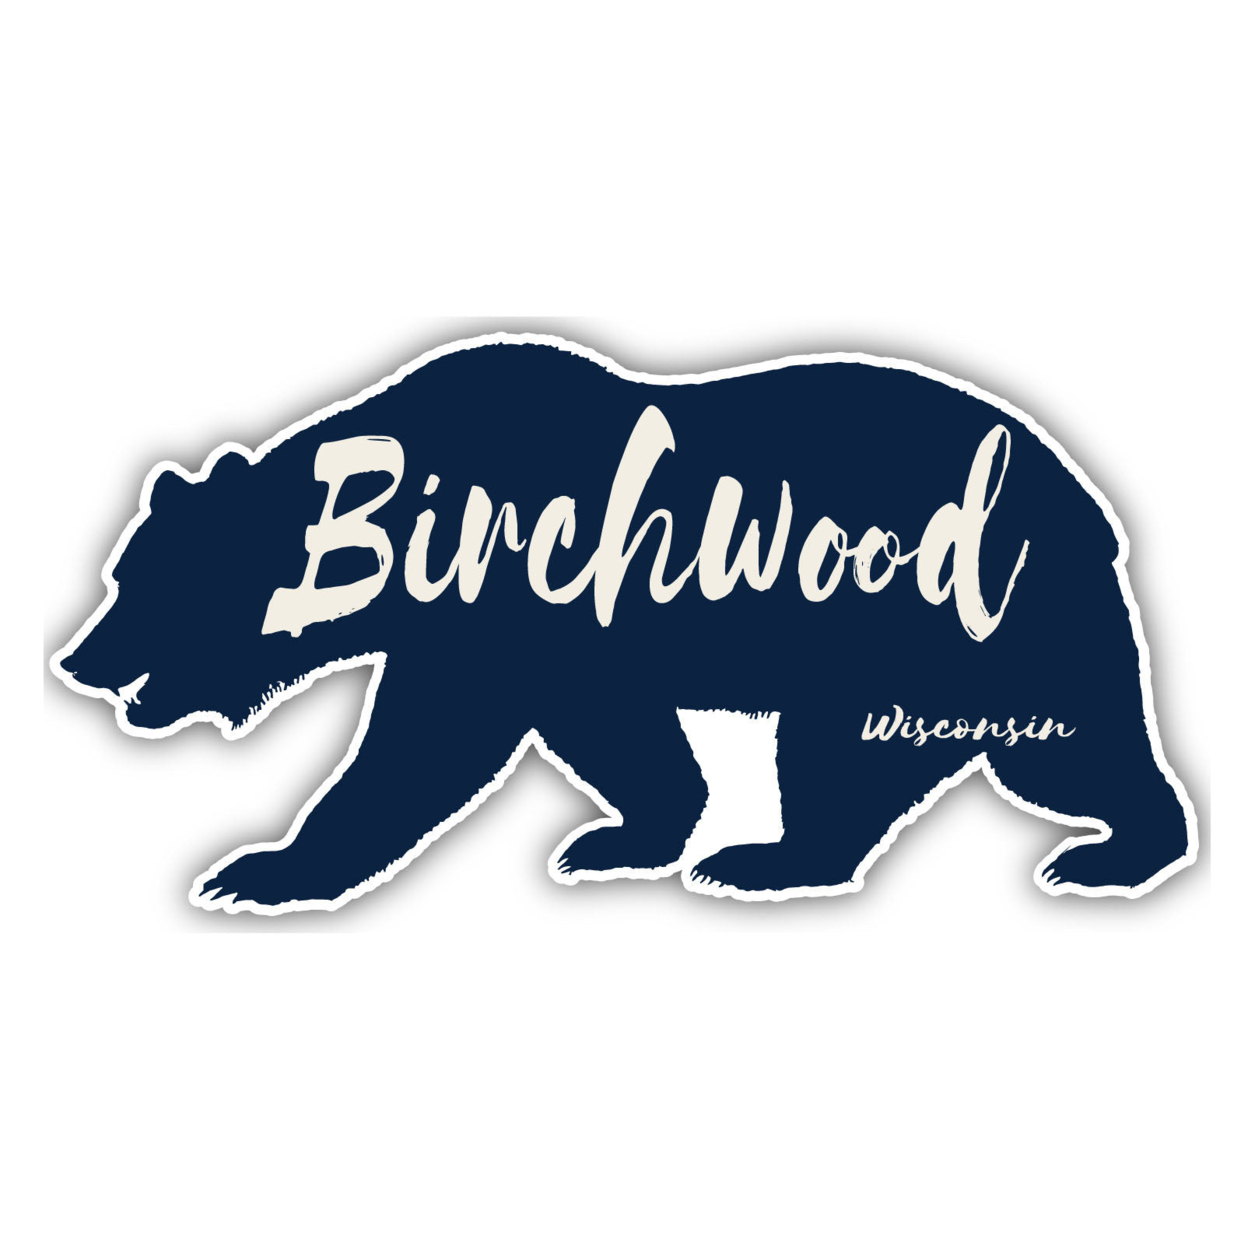 Birchwood Wisconsin Souvenir Decorative Stickers (Choose Theme And Size) - 4-Pack, 10-Inch, Bear